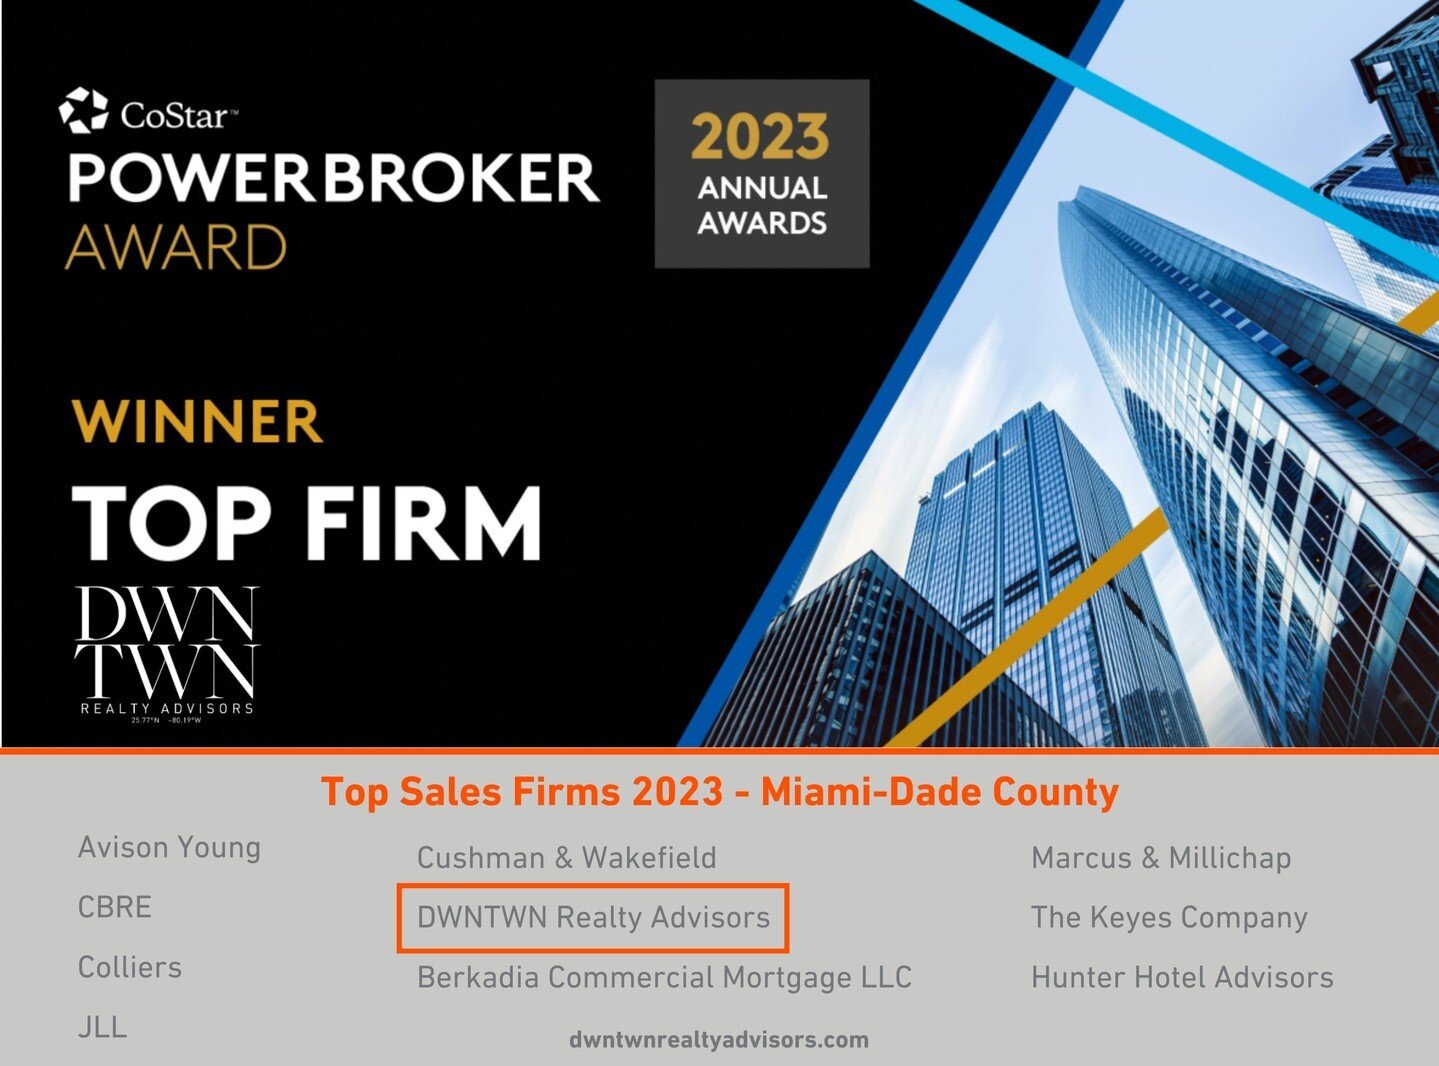 DWNTWN Realty Advisors has once again been recognized as a top-performing commercial real estate firm in South Florida for the second year in a row. The firm recently received the 2023 South Florida Costar Power Broker award, and is the only middle m